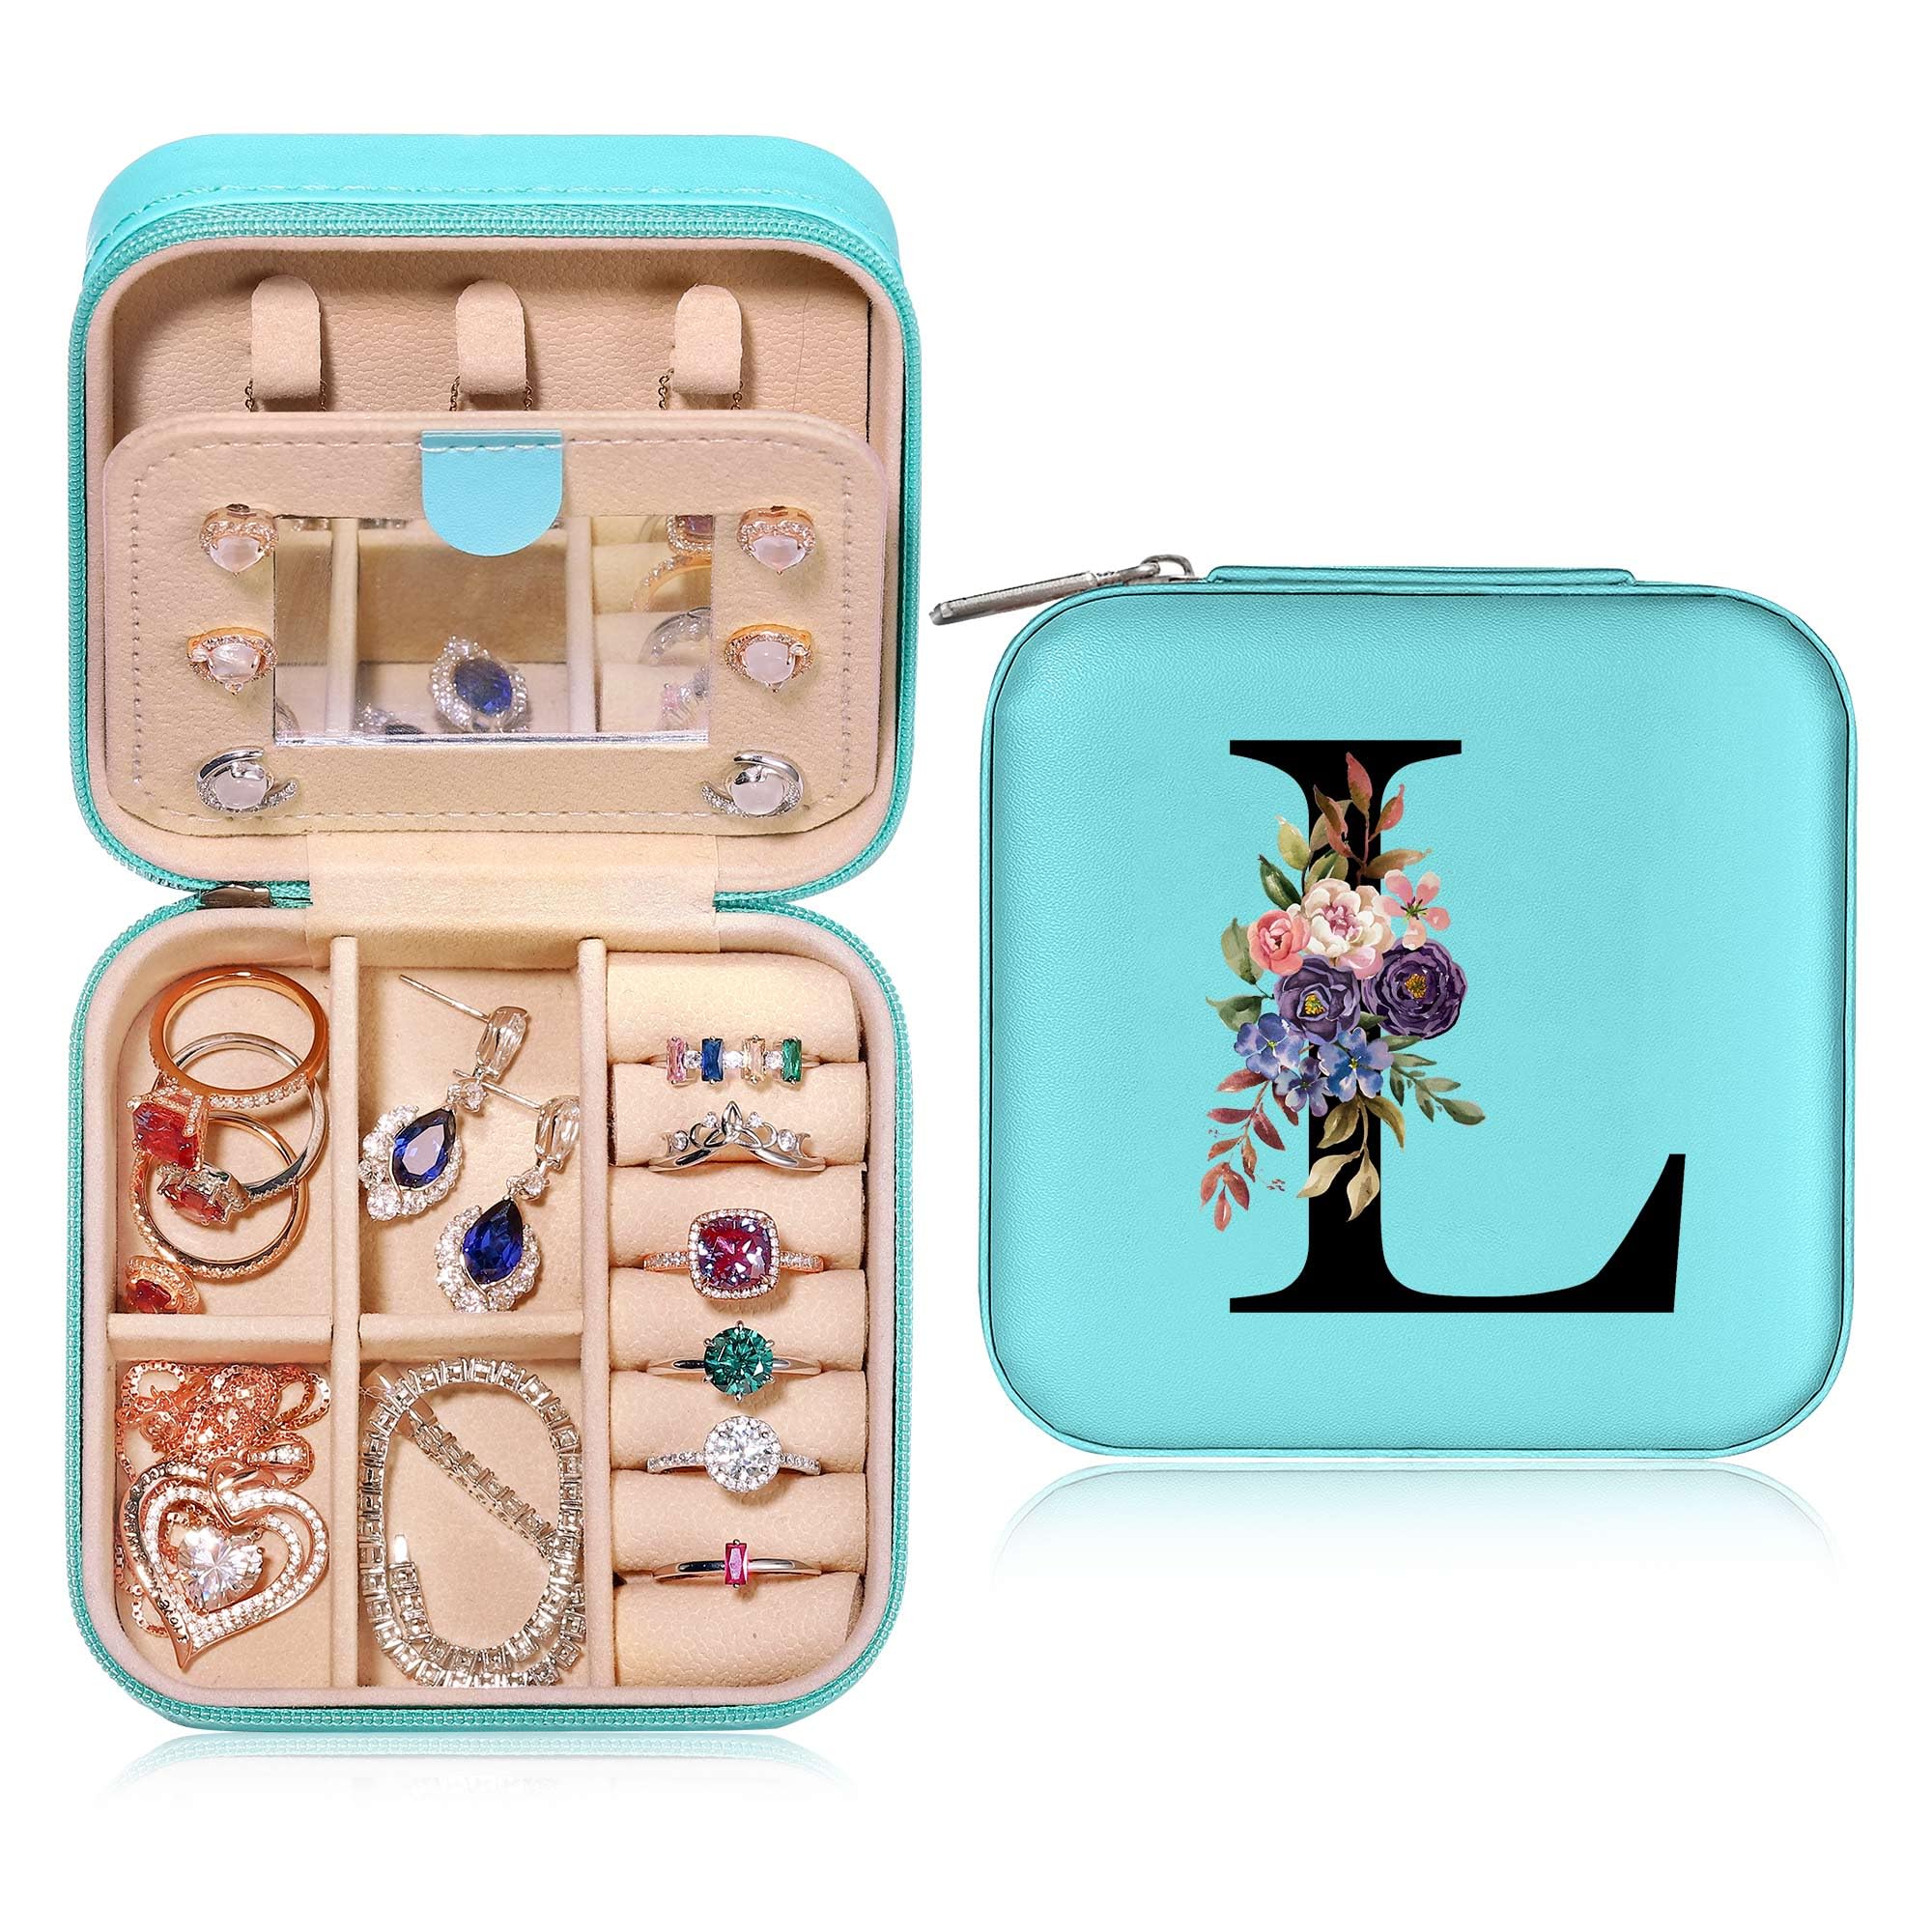 Parima Travel Jewelry Case for for Girls Fashion, L Initial Blue Jewelry Case Mini Jewelry Travel Case for Girls Jewelry Box for Girls Airport Travel Accessories Must Haves Jewelry Case